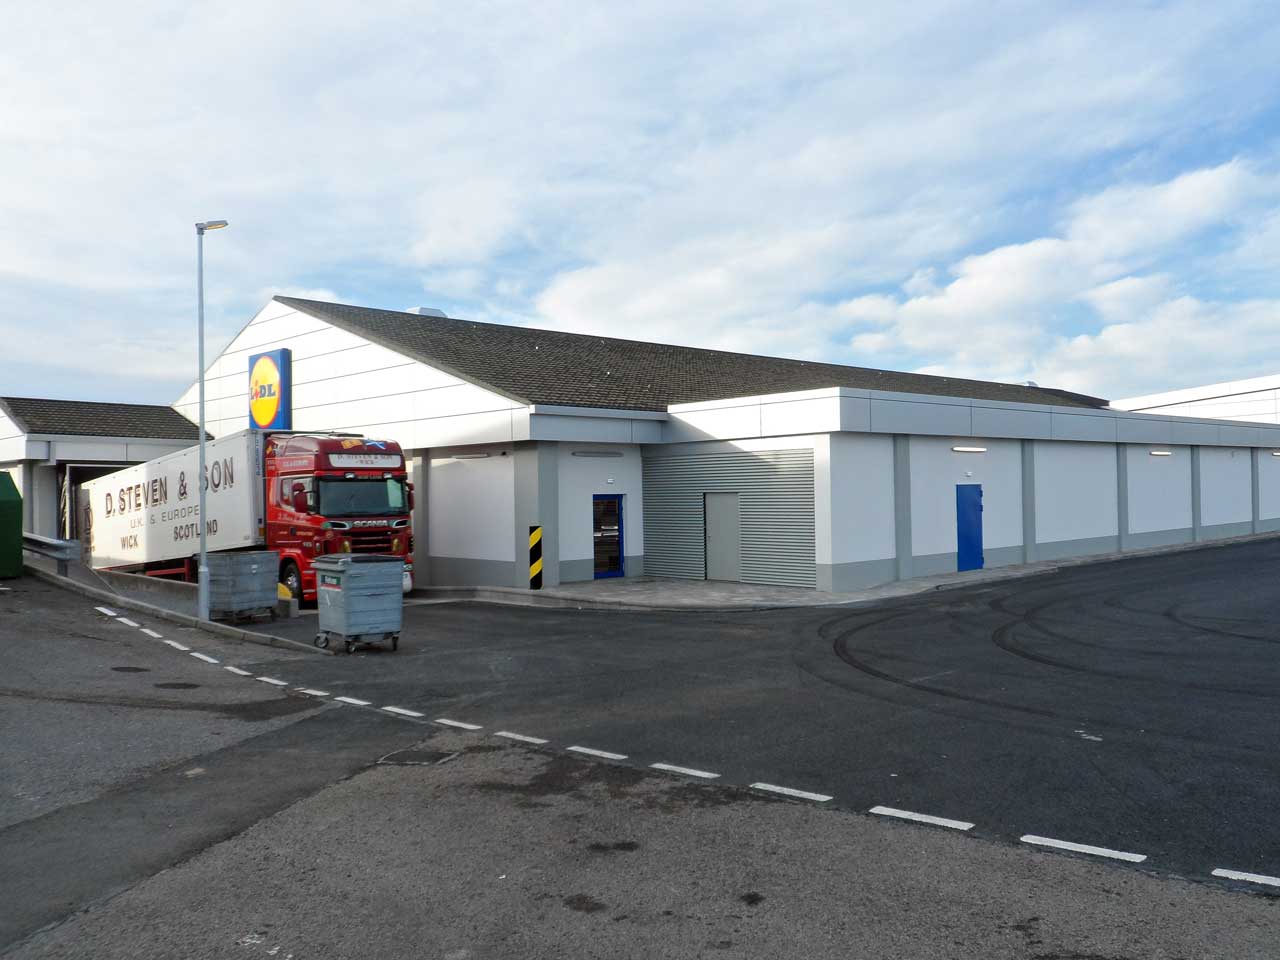 Photo: Lidl, Wick - Completed and Shelves Being Stocked - 5 October 2014